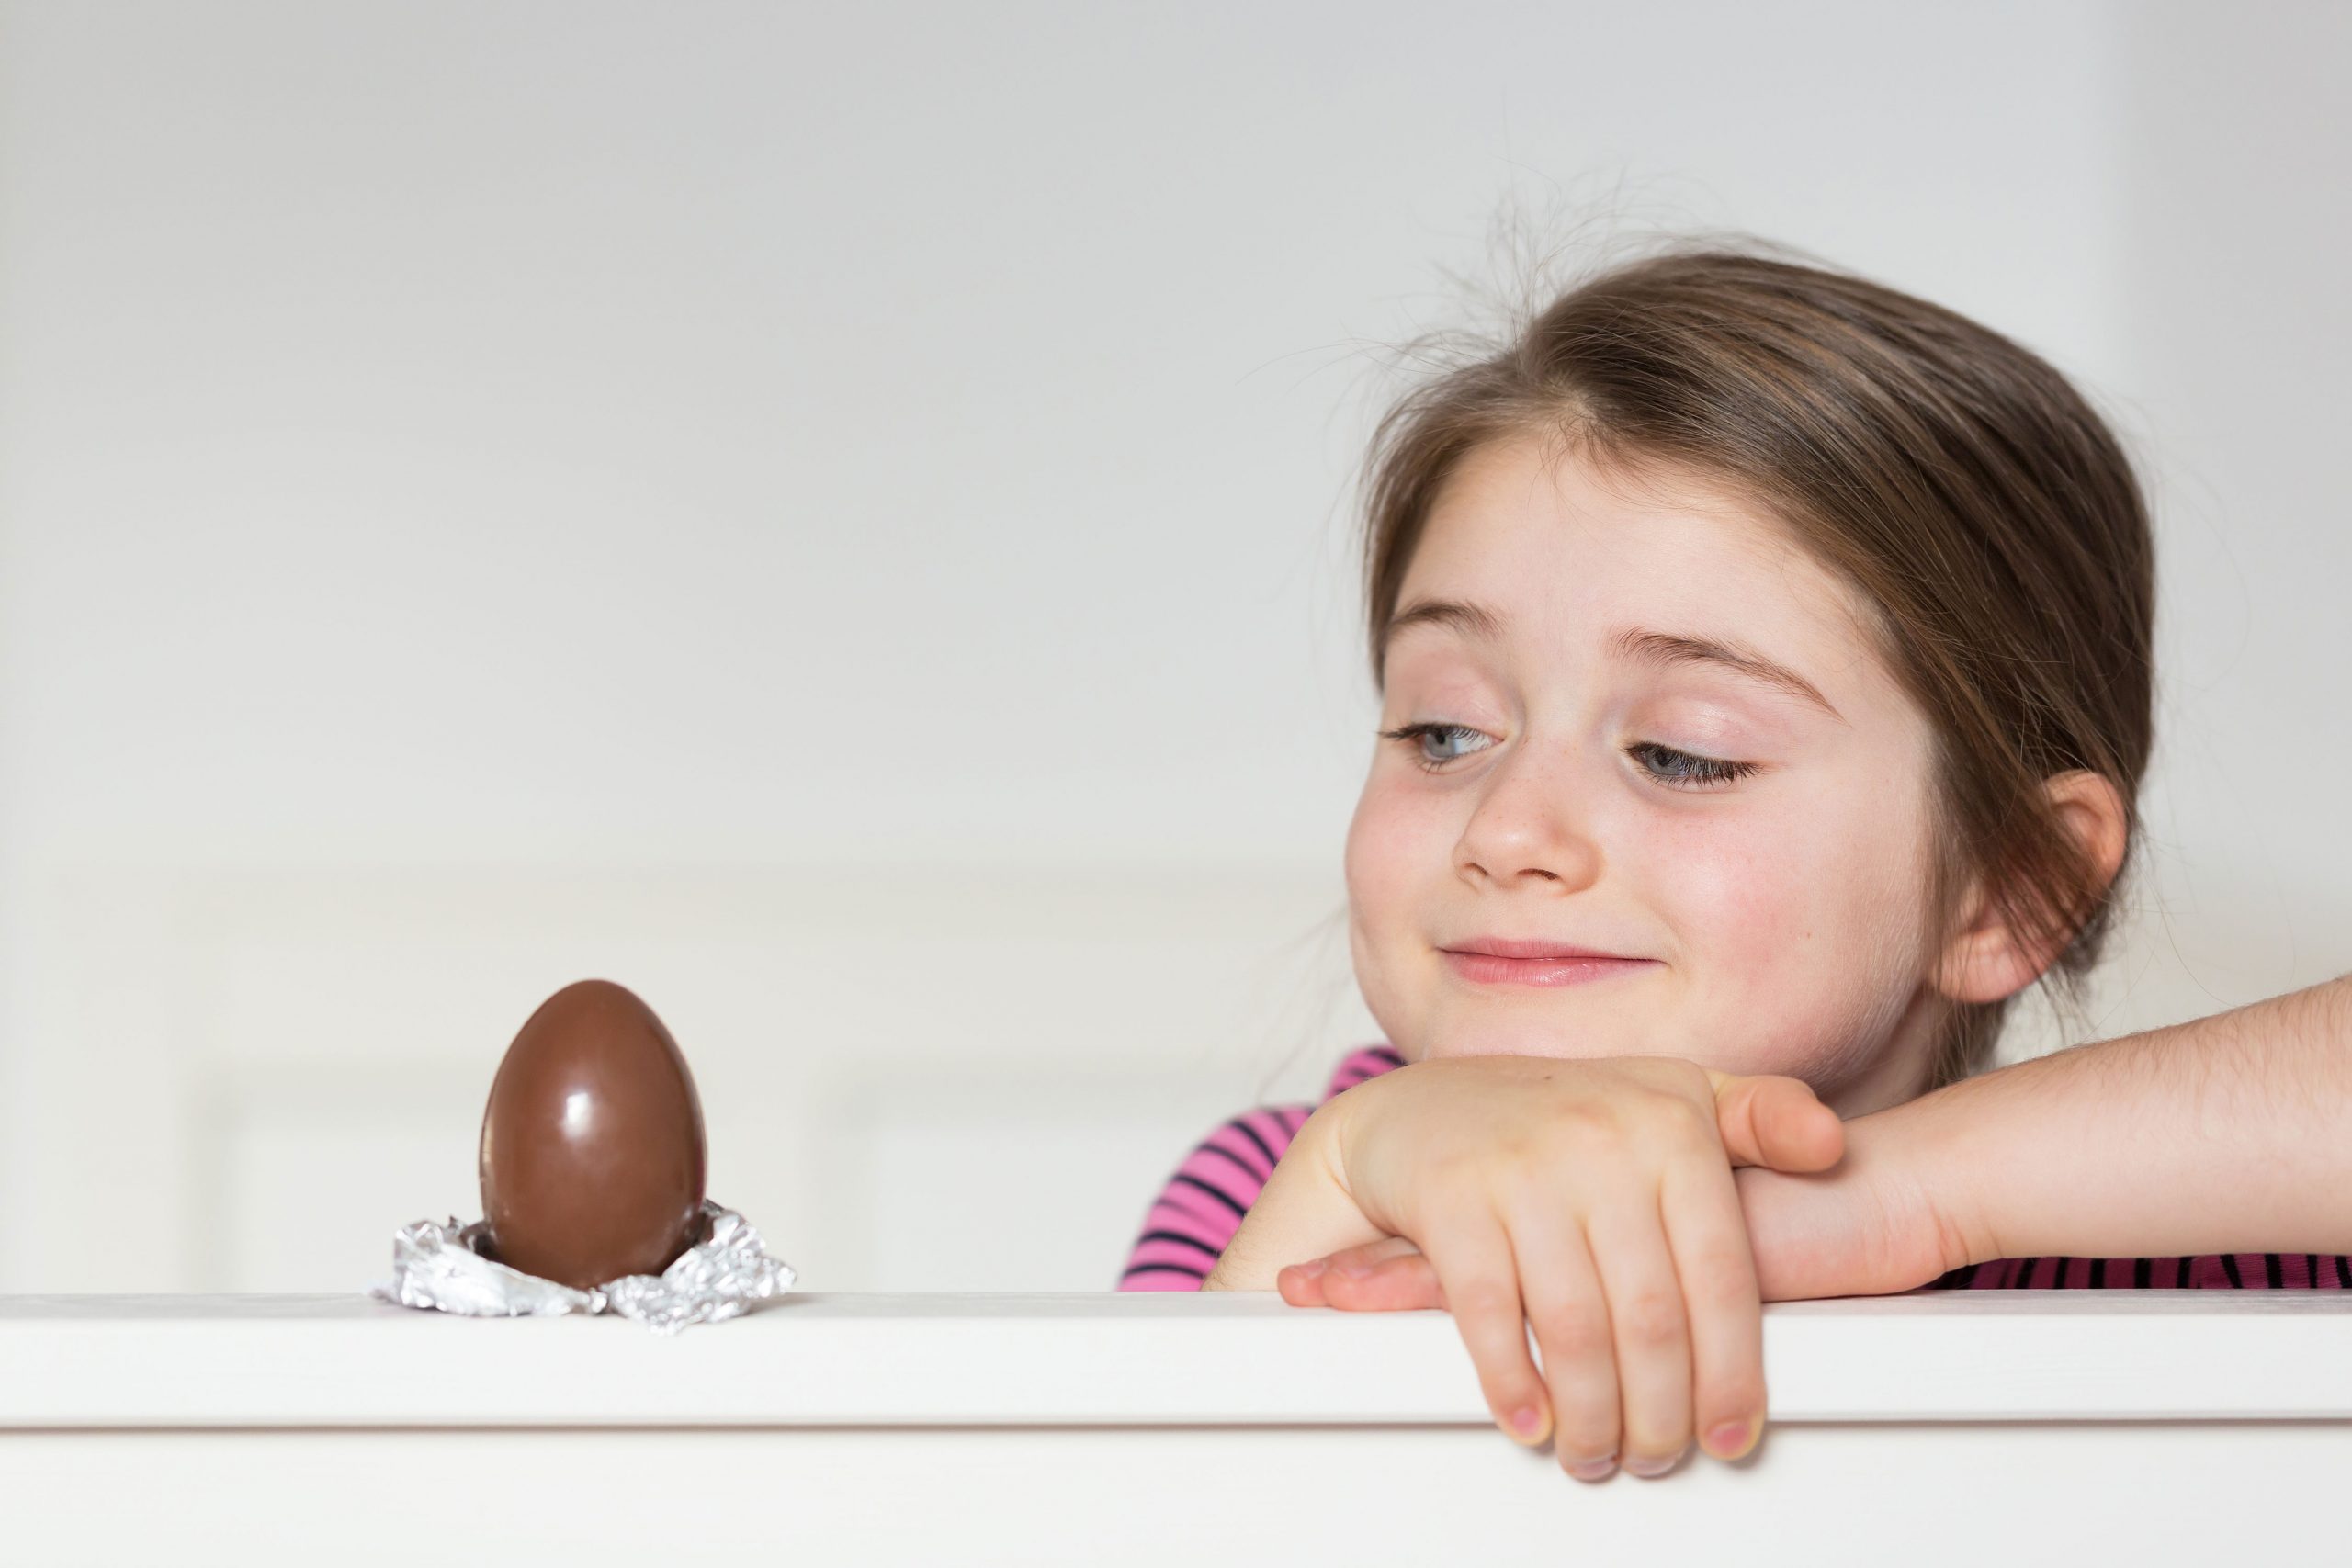 Girl looking at chocolate Easter egg